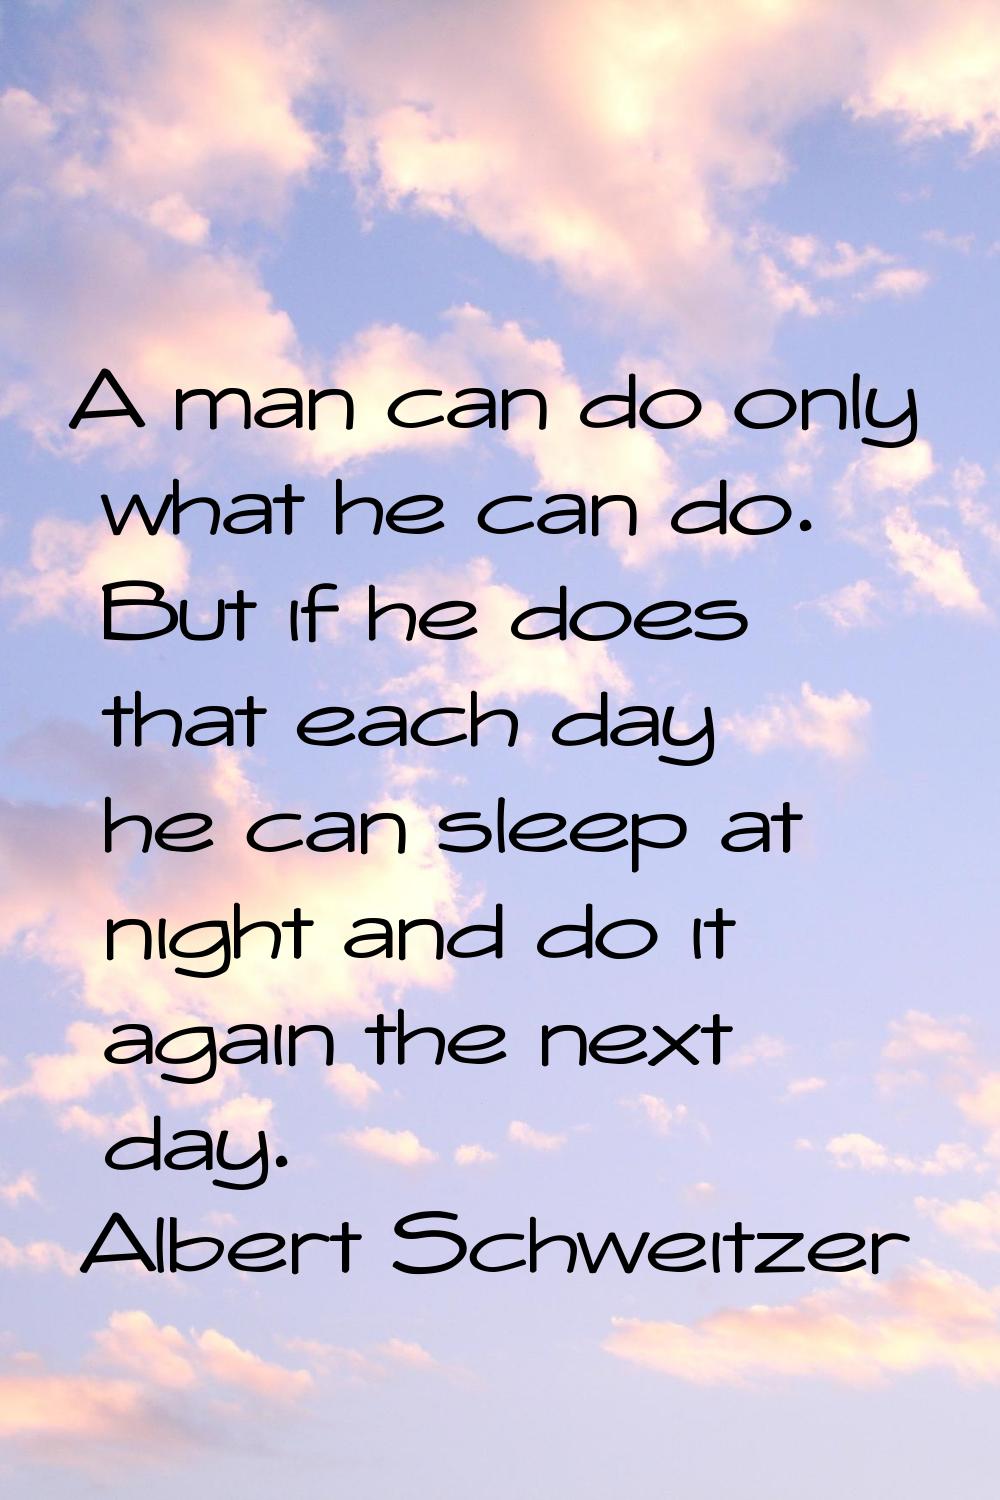 A man can do only what he can do. But if he does that each day he can sleep at night and do it agai